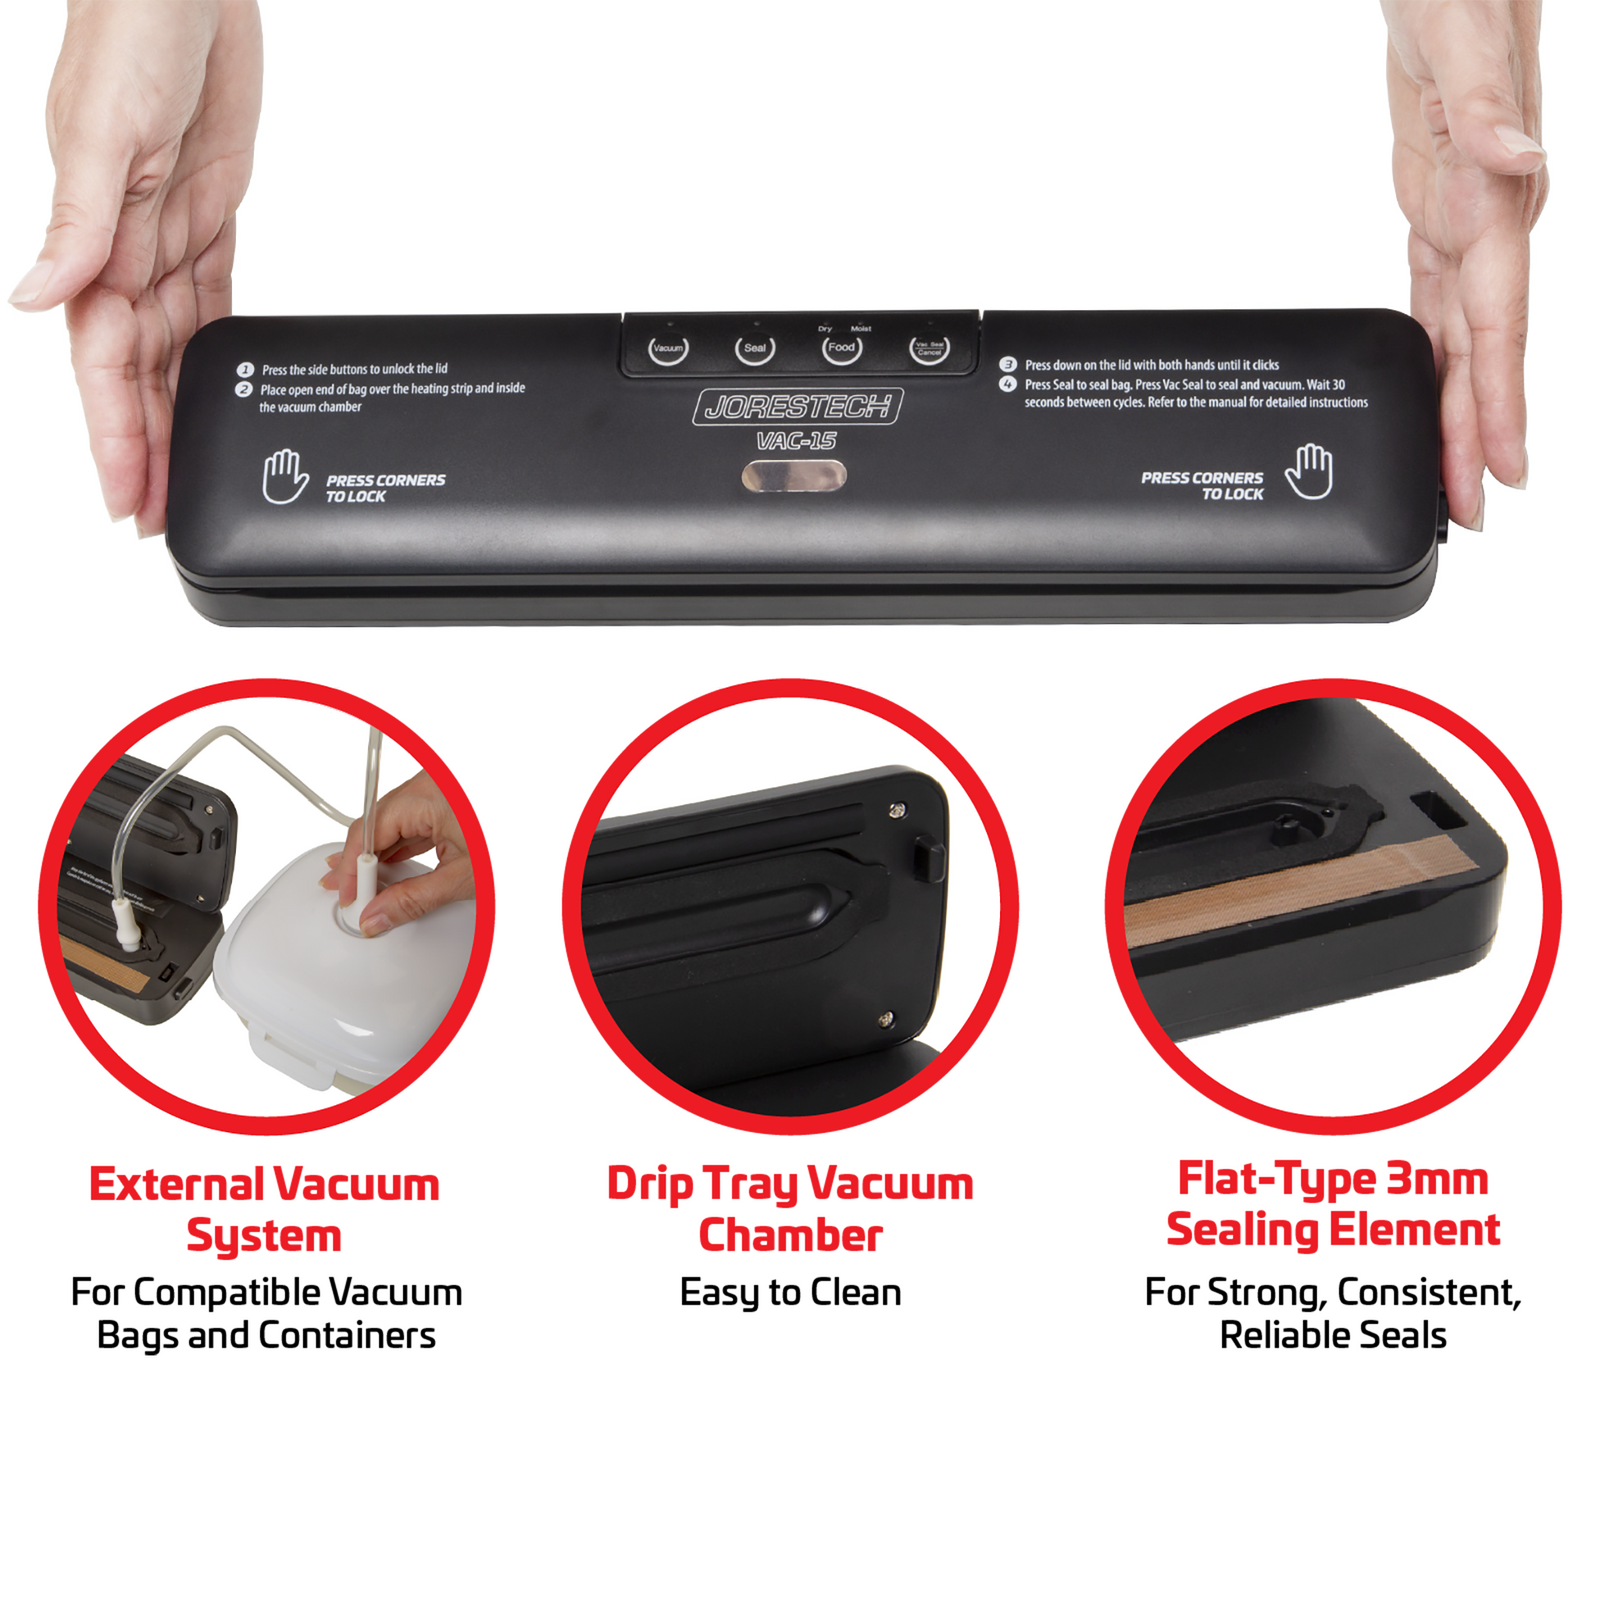 Counter Friendly Vacuum Sealing Machine for Home & Office Use